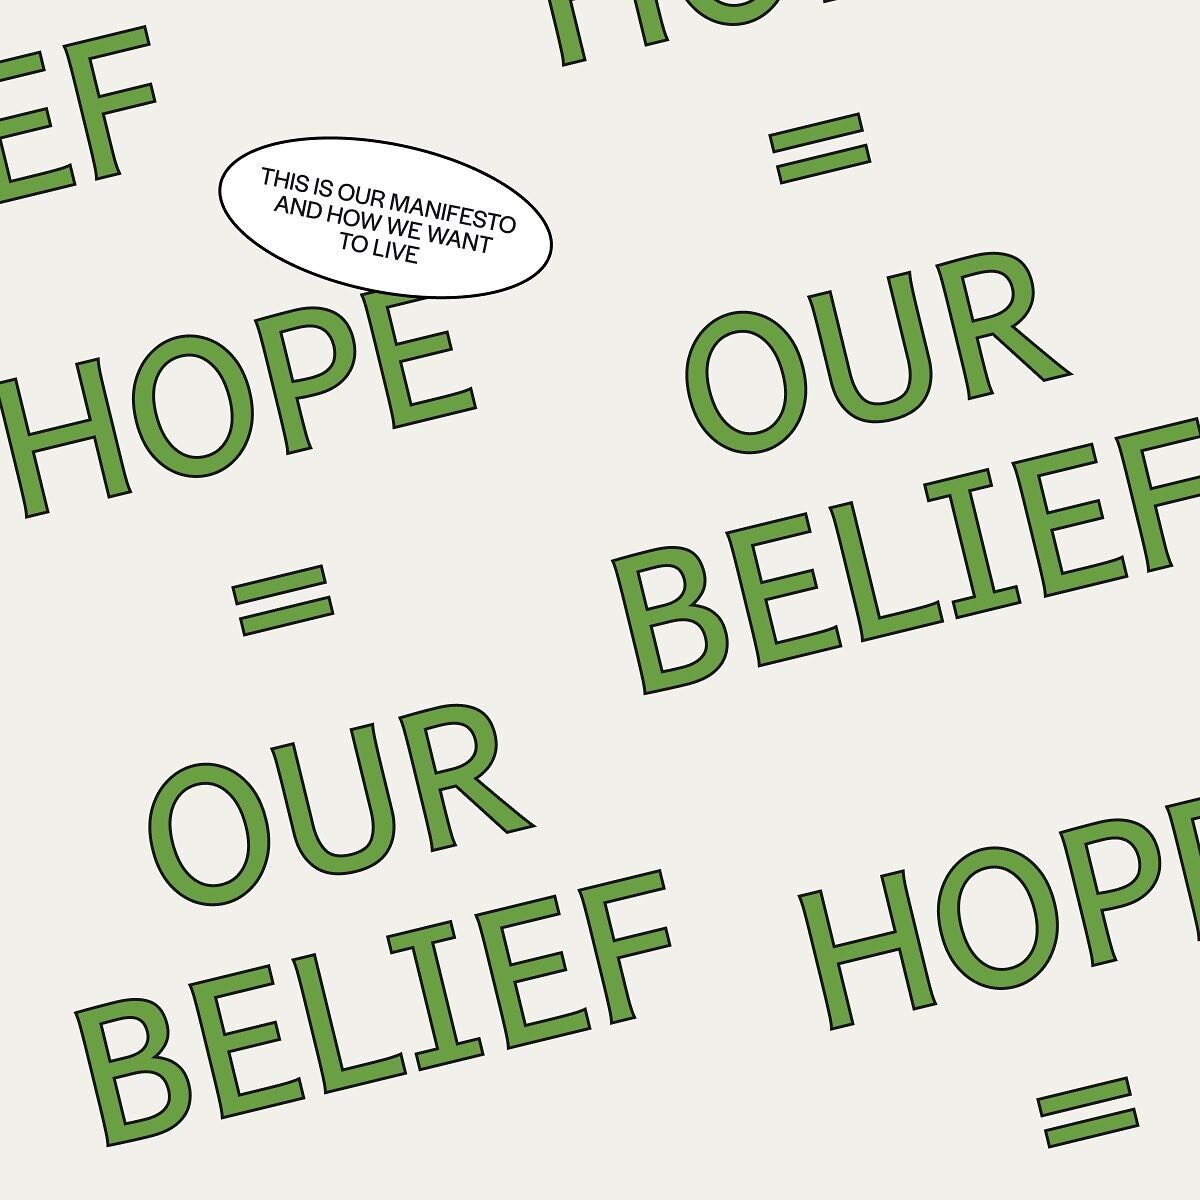 &ldquo;Hope is our Belief&rdquo;
Good day or bad, hope is our belief because Christ is alive. Need some hope today? DM us 💬 #hopeisourbelief